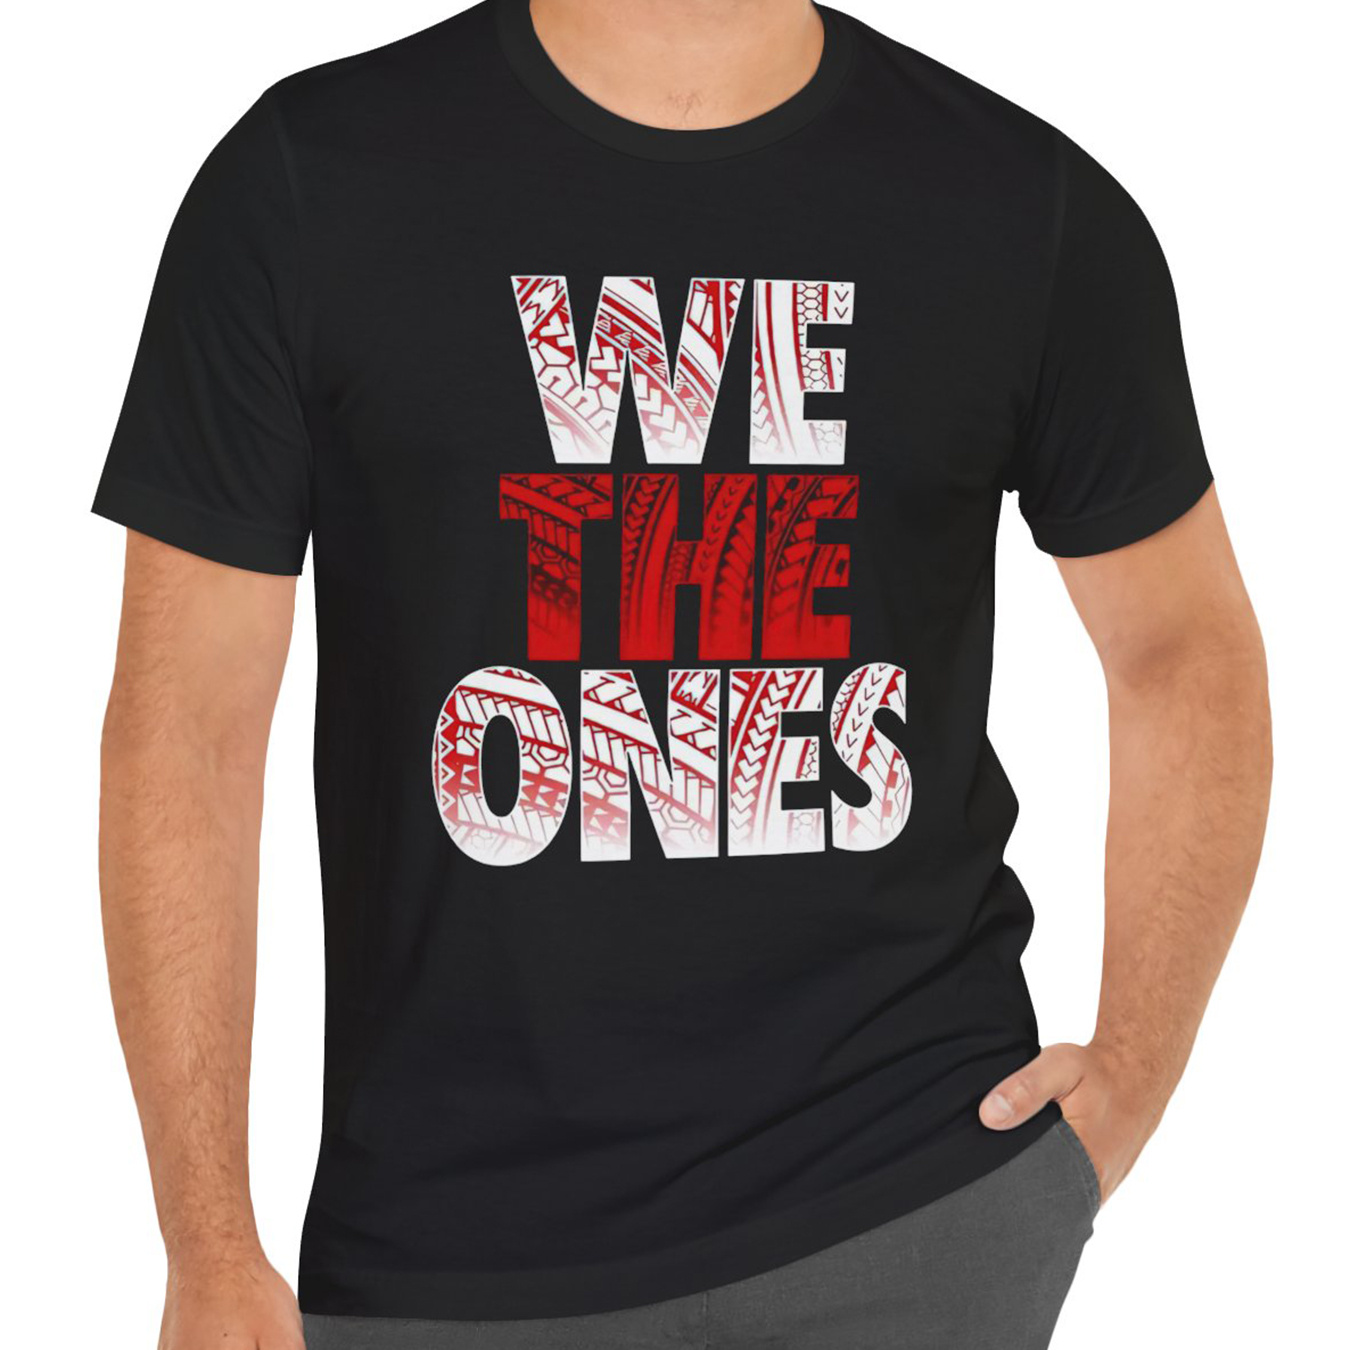 

We The Ones Print, Men's Round Crew Neck Short Sleeve, Simple Style Tee Fashion Regular Fit T-shirt, Casual Comfy Breathable Top For Spring Summer Holiday Leisure Vacation Men's Clothing As Gift